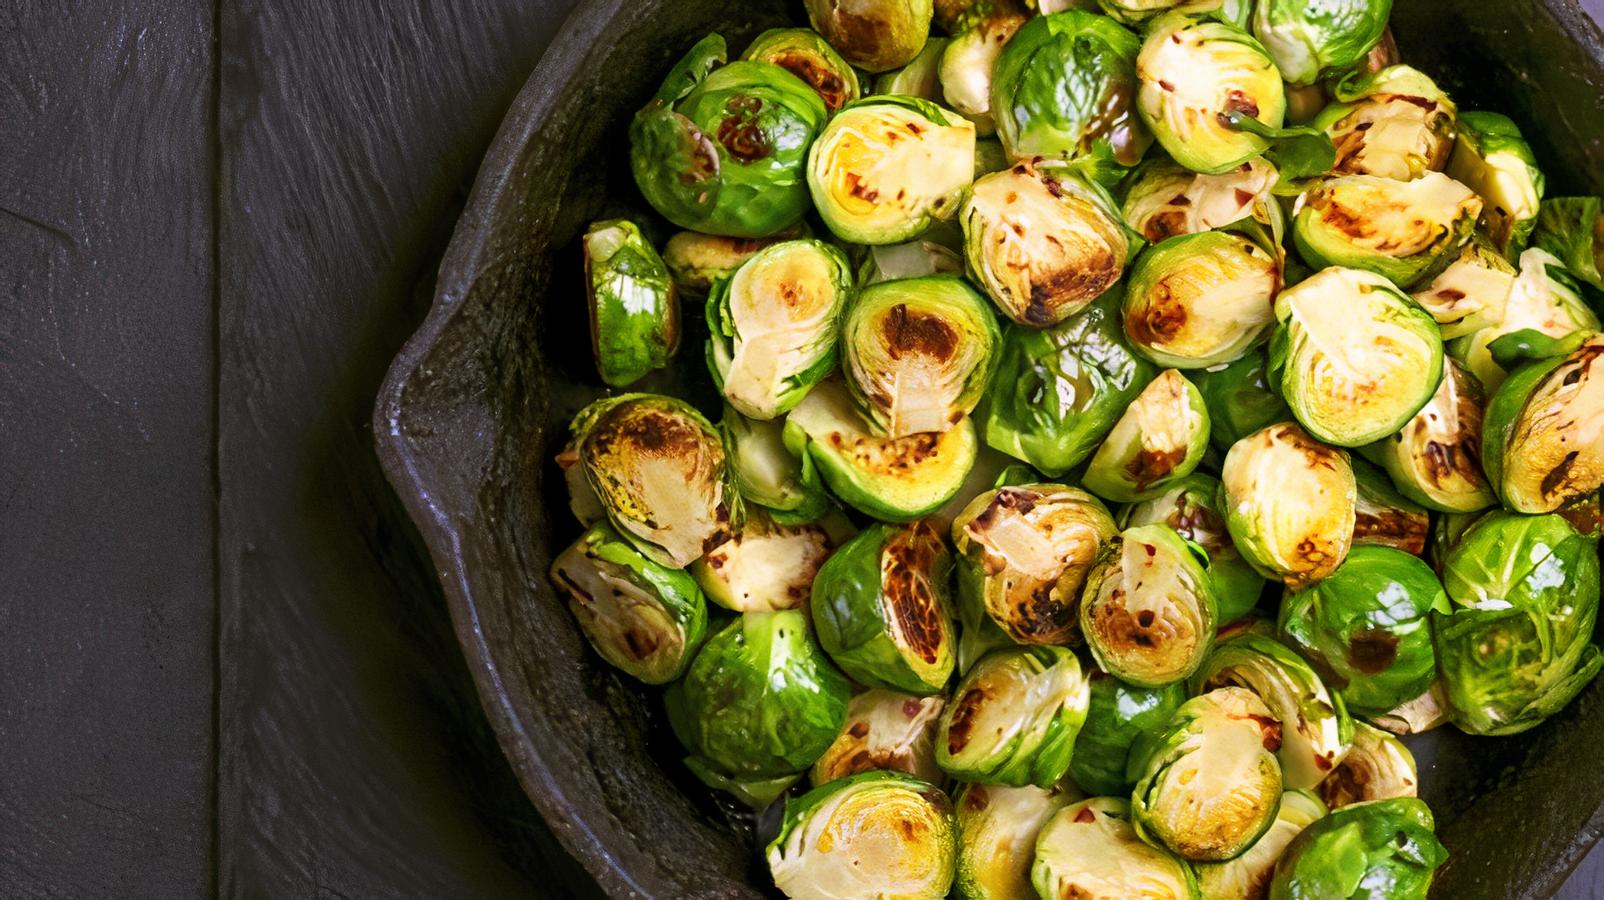 Roasted Brussel Sprouts,8oz